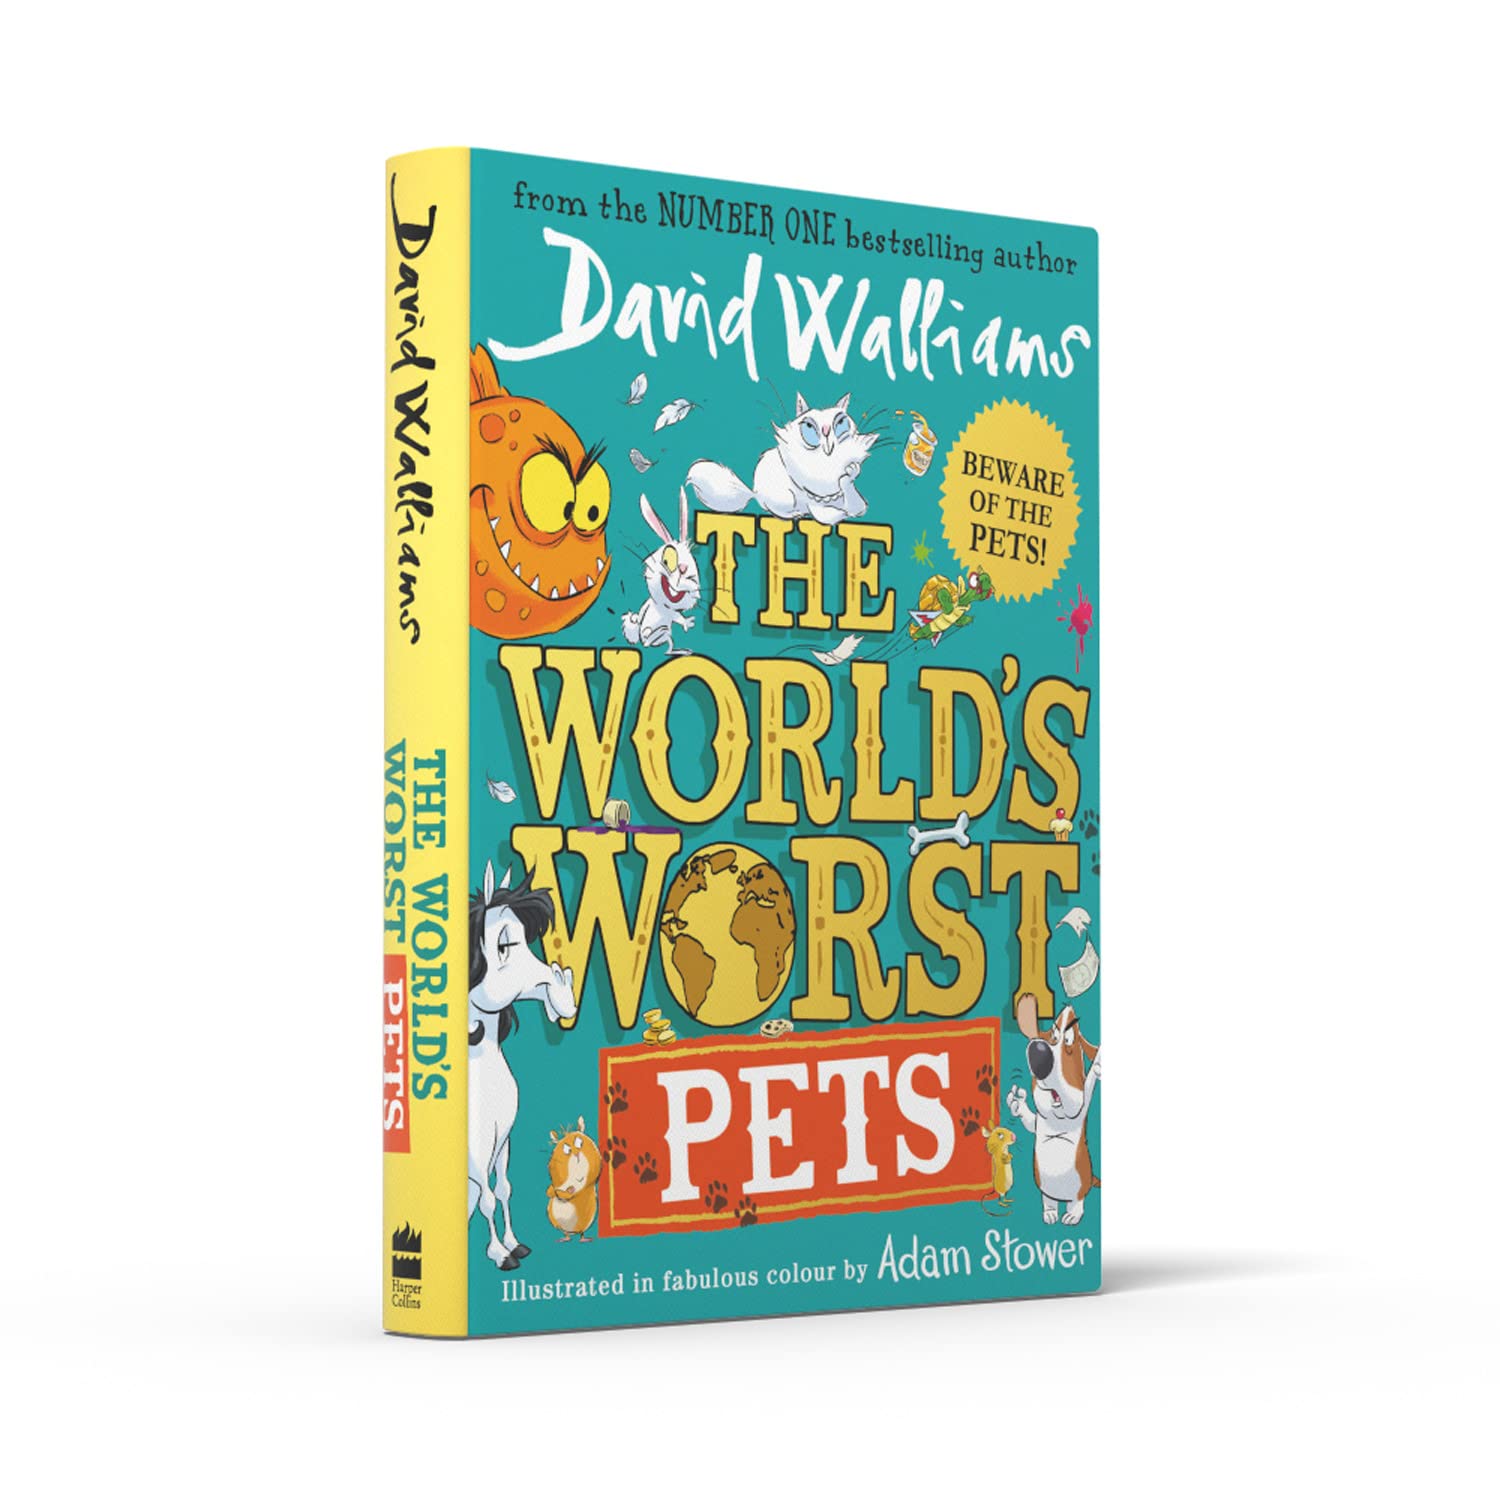 The World's Worst Pets by David Walliams